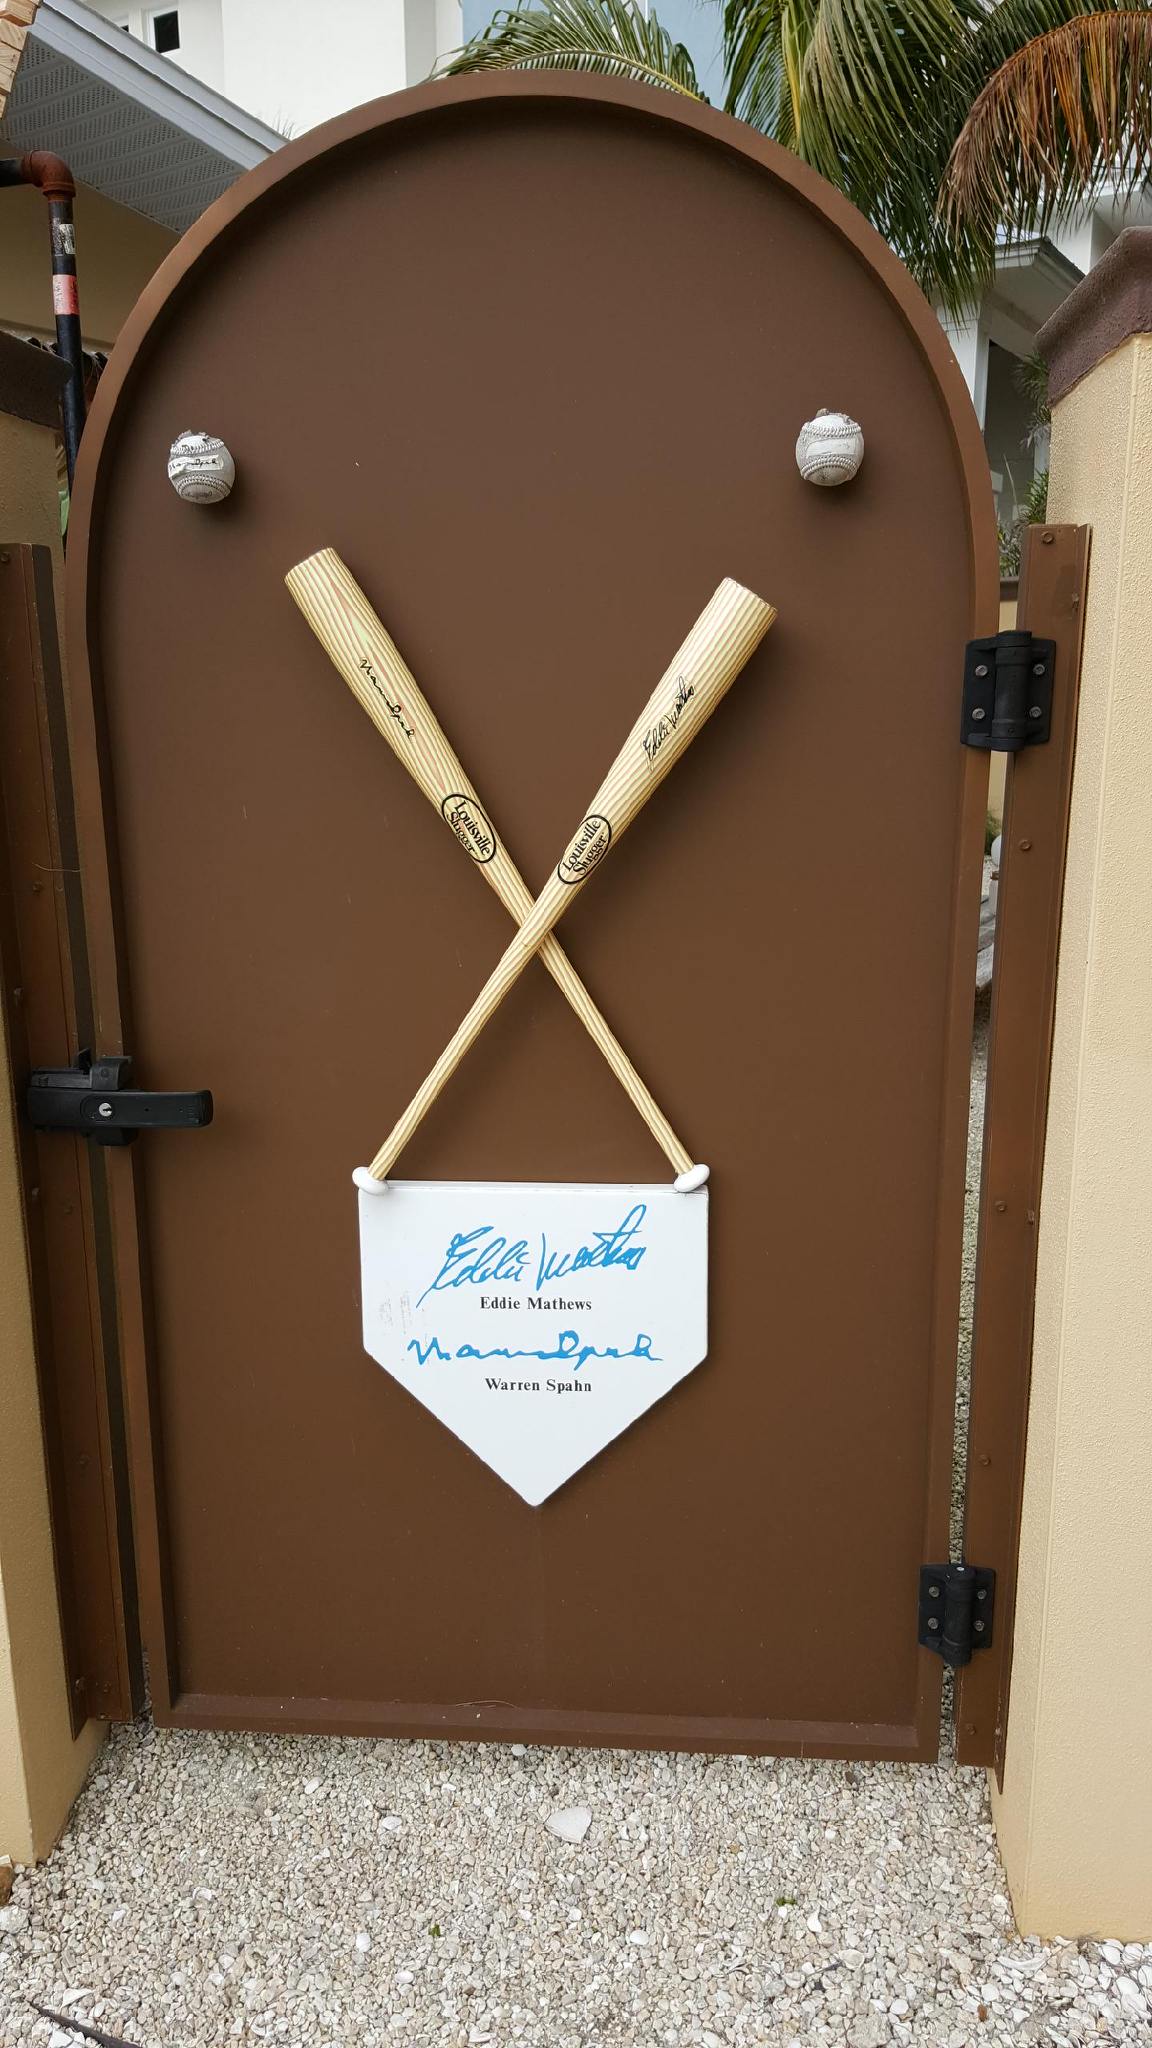 A gate with bats and autographs of Eddie Mathews and Warren Spahn